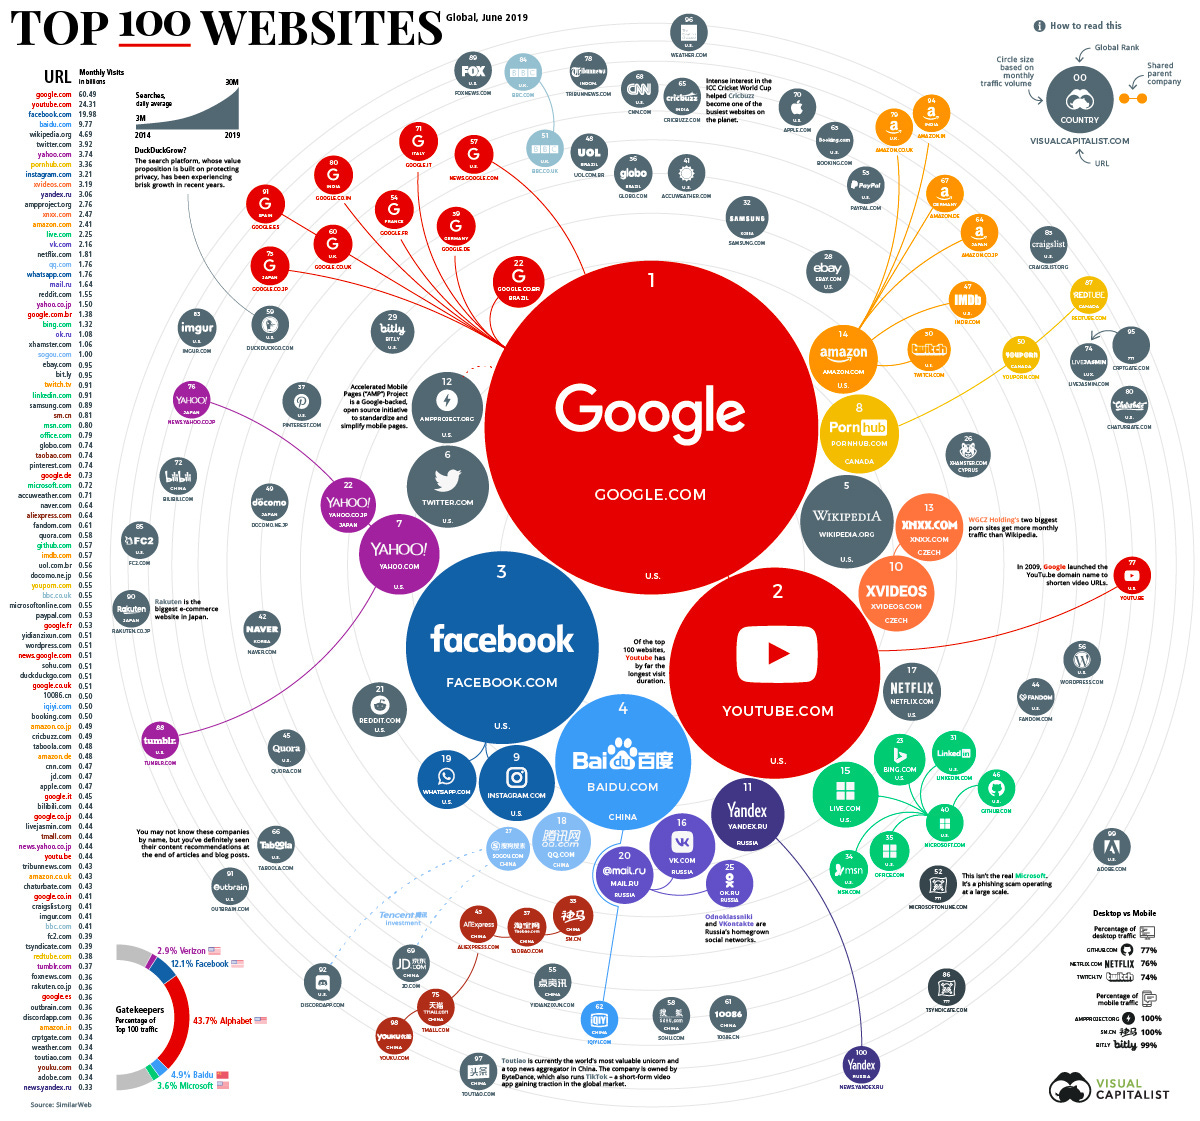 Top 100 Websites Ranking for 2019